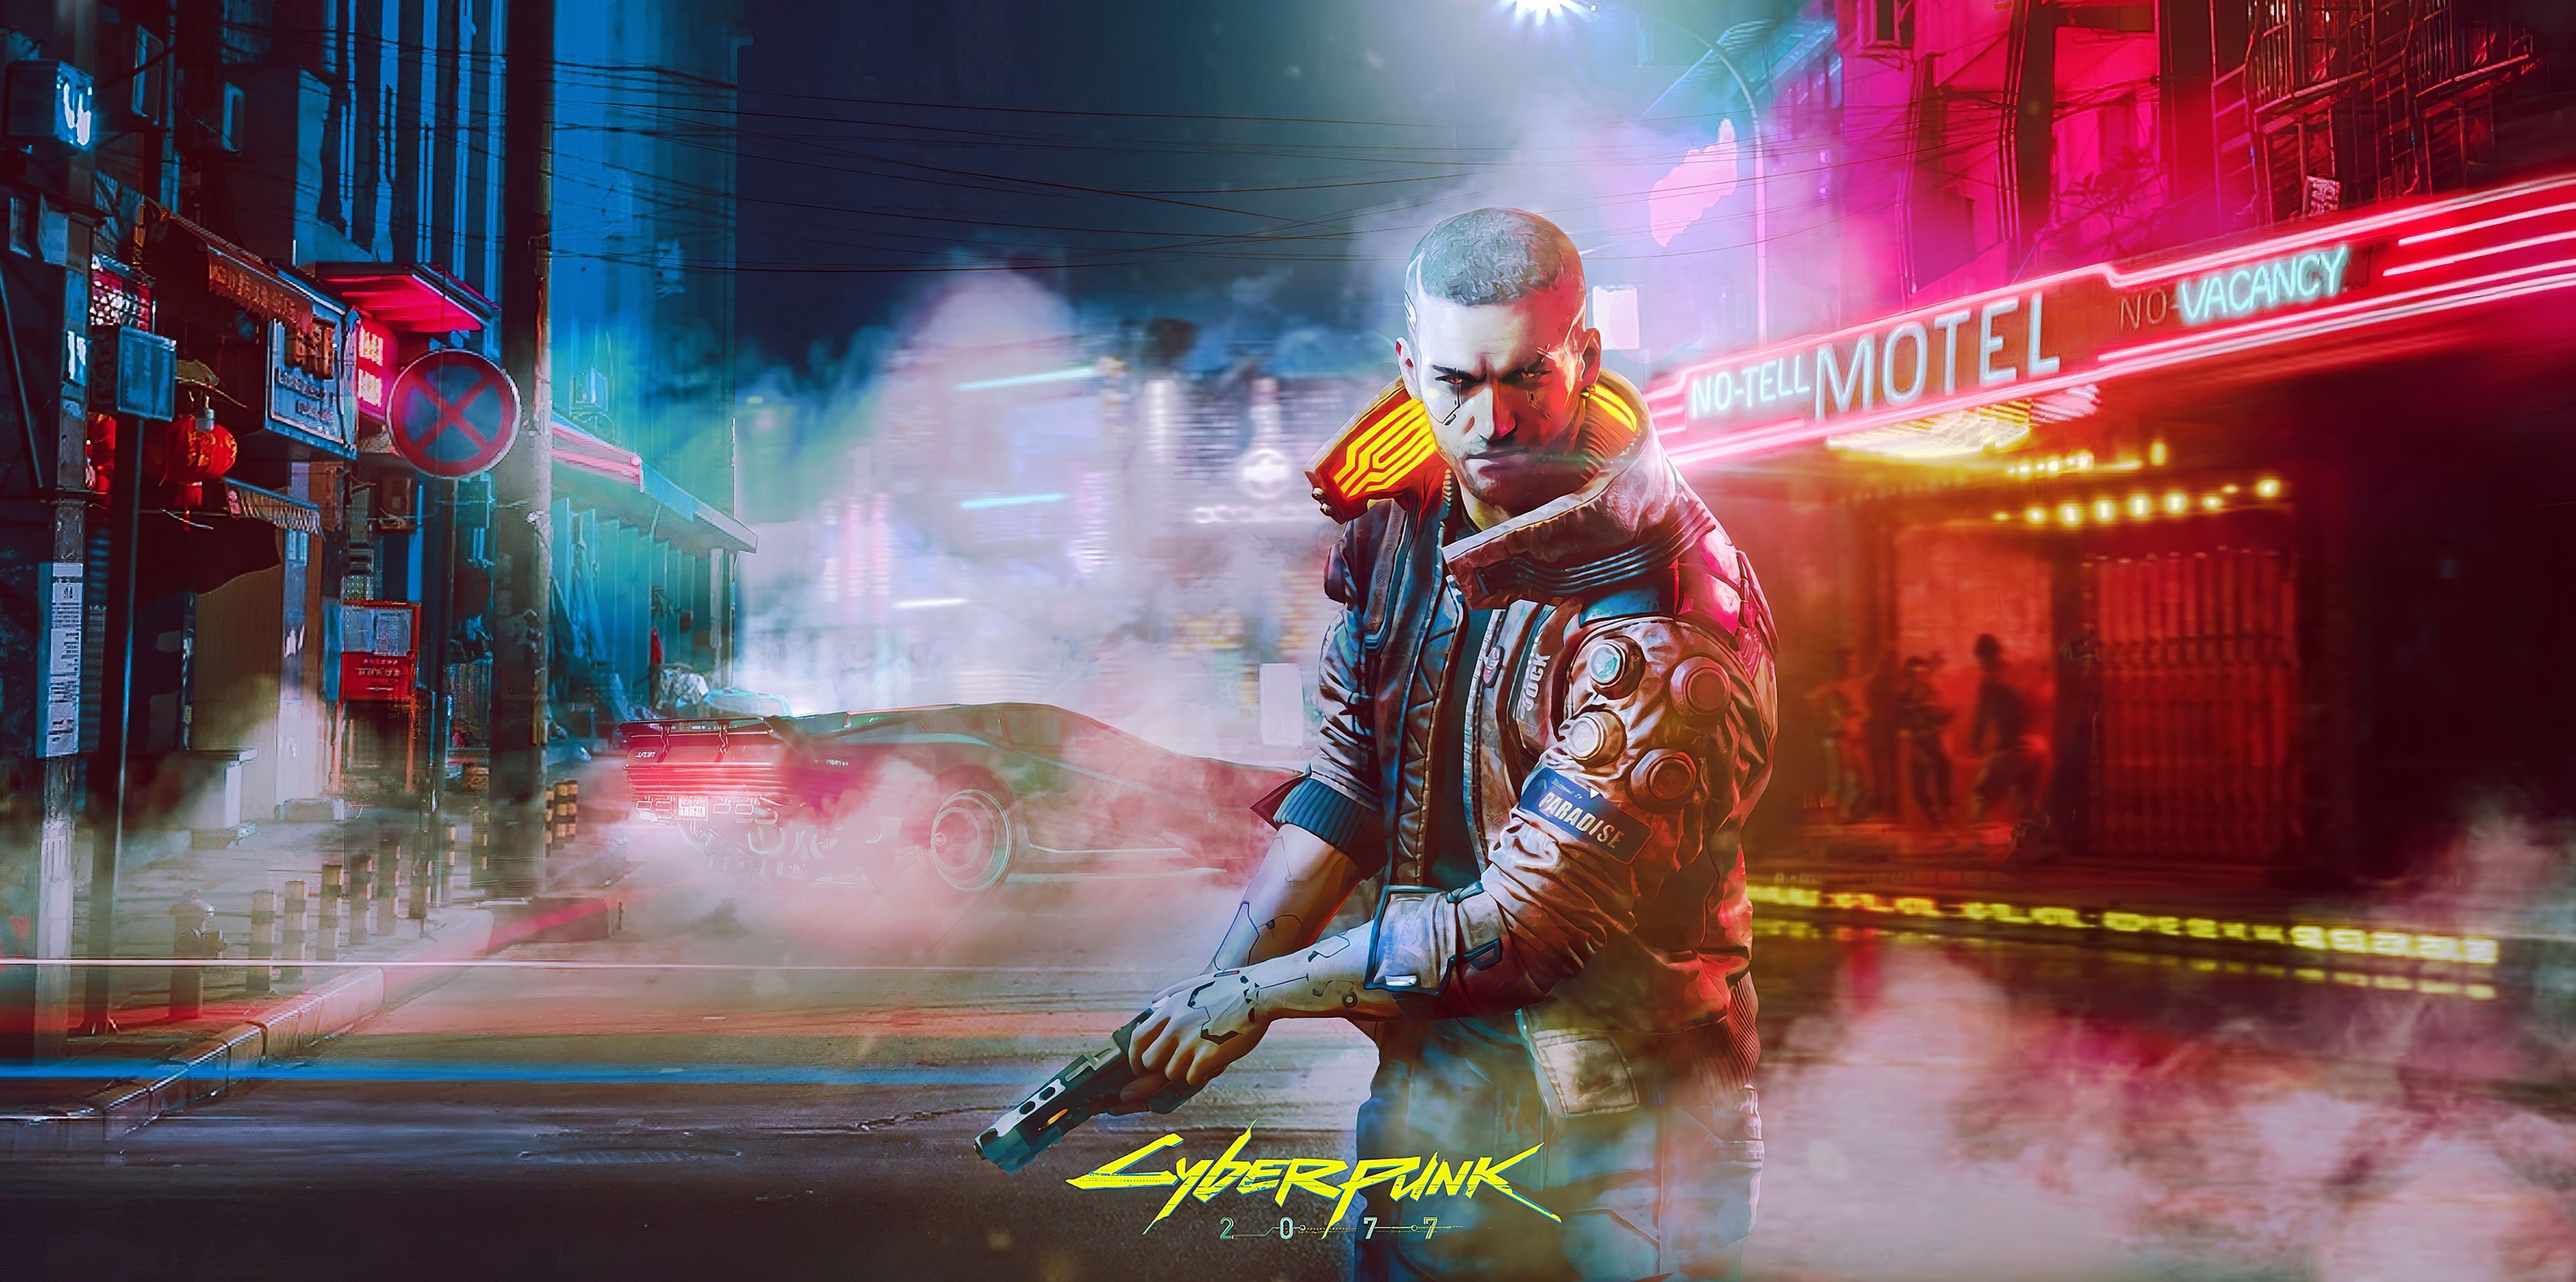 2048x2048 2020 Cyberpunk 2077 4k Ipad Air HD 4k Wallpapers, Image, Backgrounds, Photos and Pictures